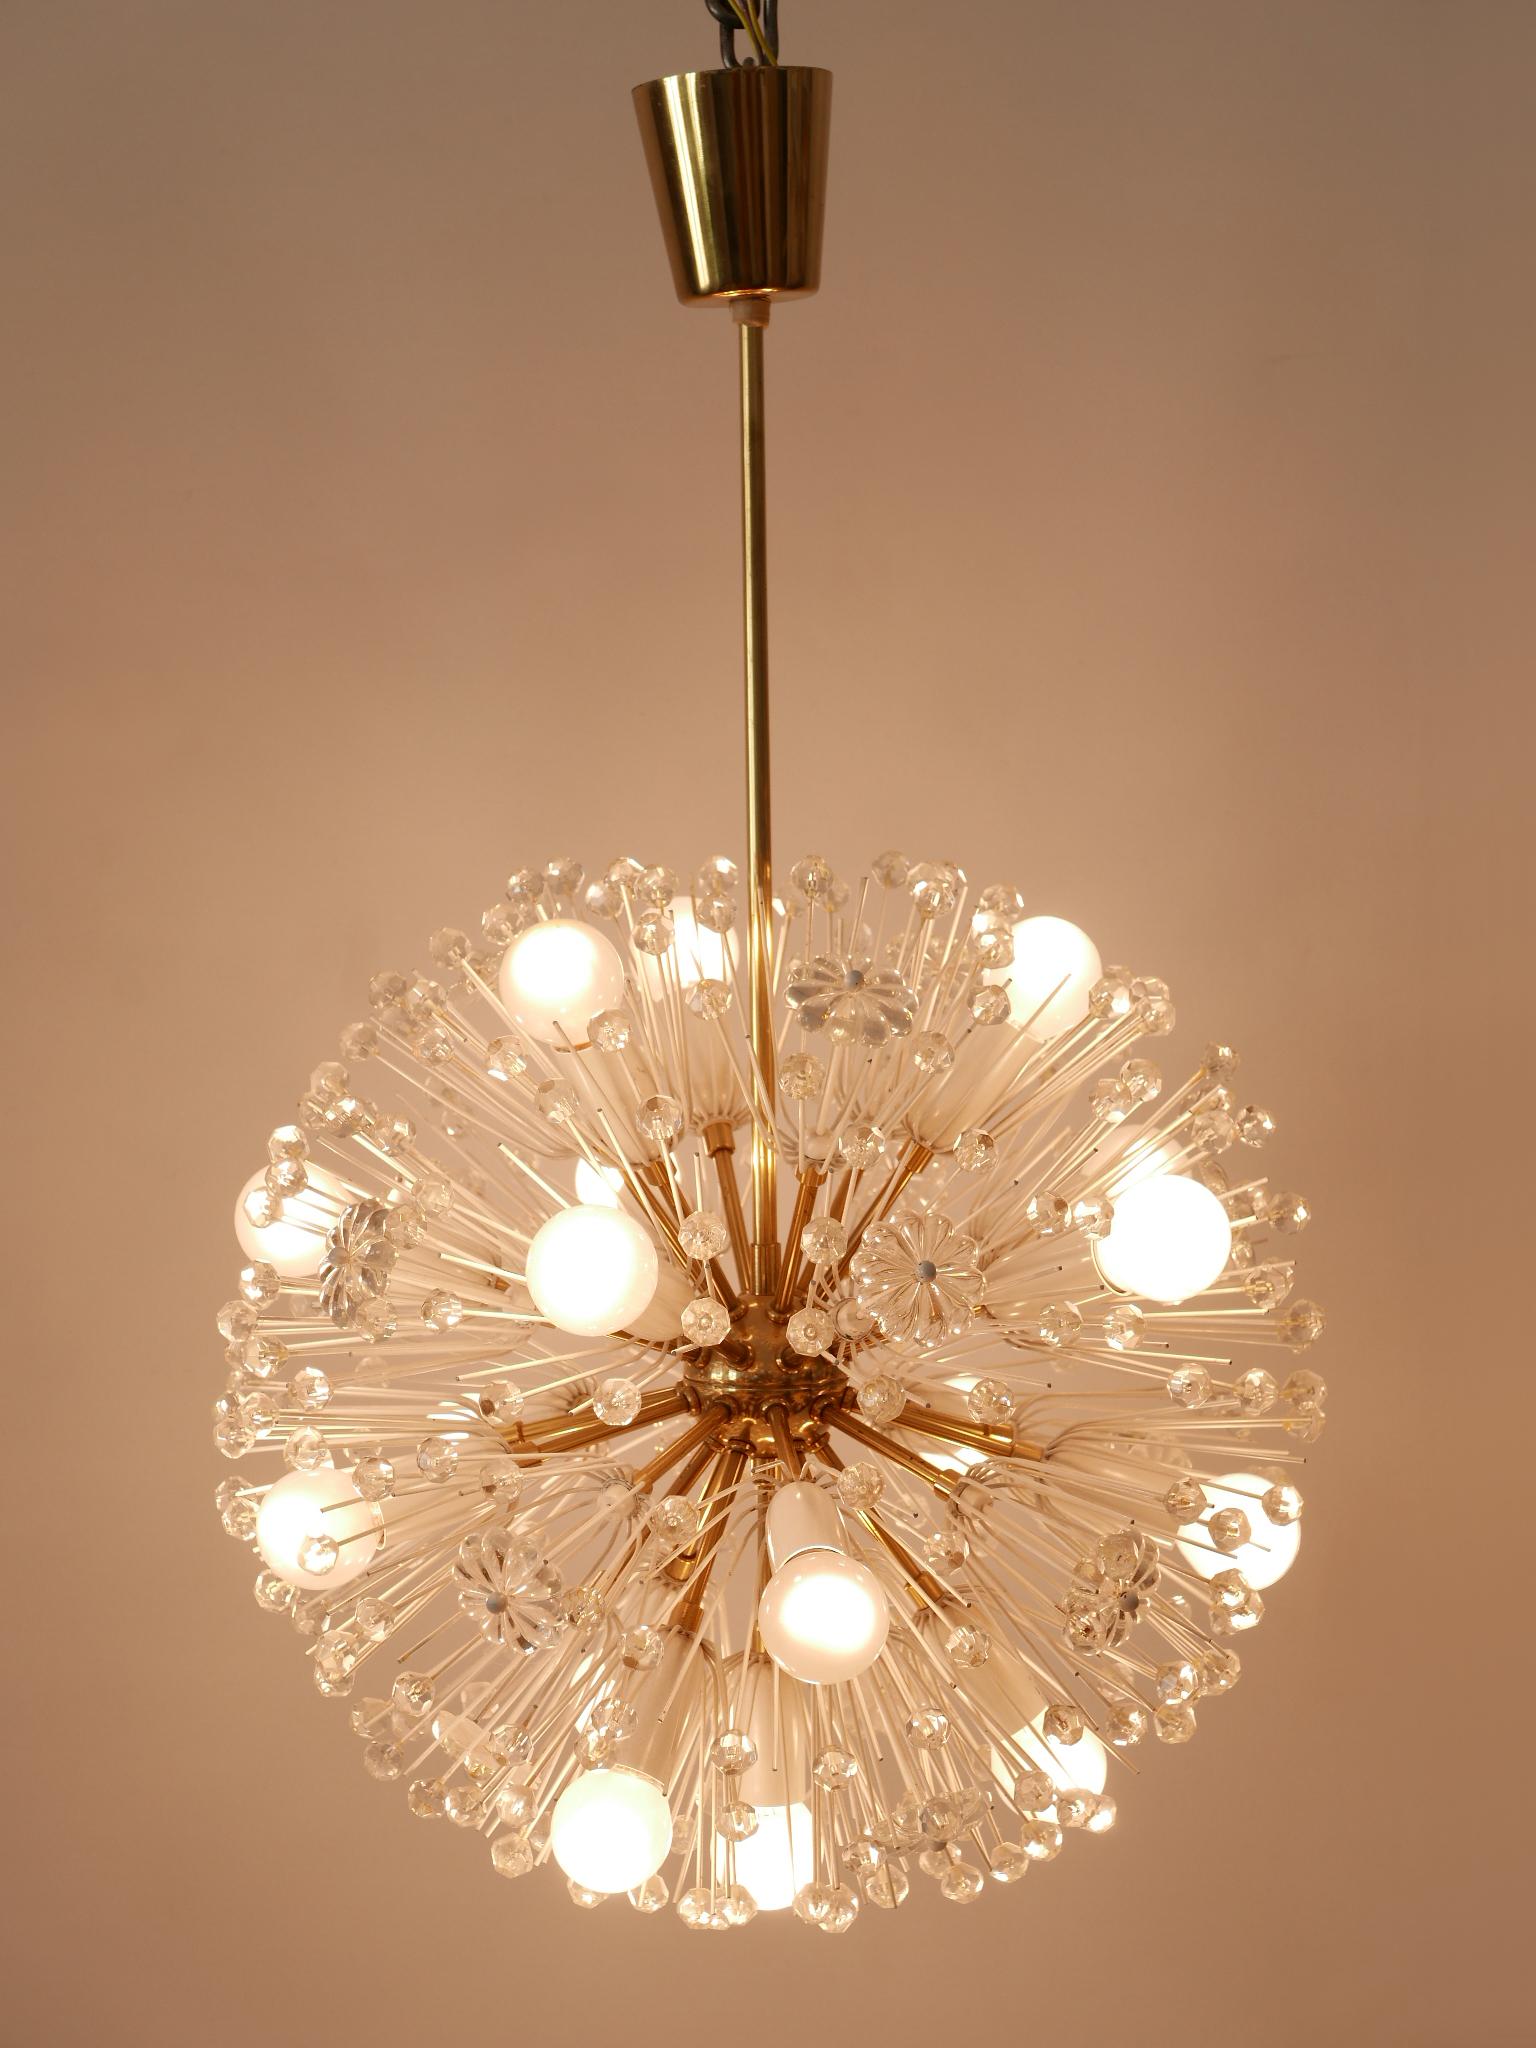 Amazing light object. Lovely and highly decorative Mid-Century Modern sputnik chandelier 'dandelion'. Designed by Emil Stejnar for Rupert Nikoll, Austria, 1950s.

Executed in brass, glass pearls and flowers, the chandelier is executed with 17 x E14